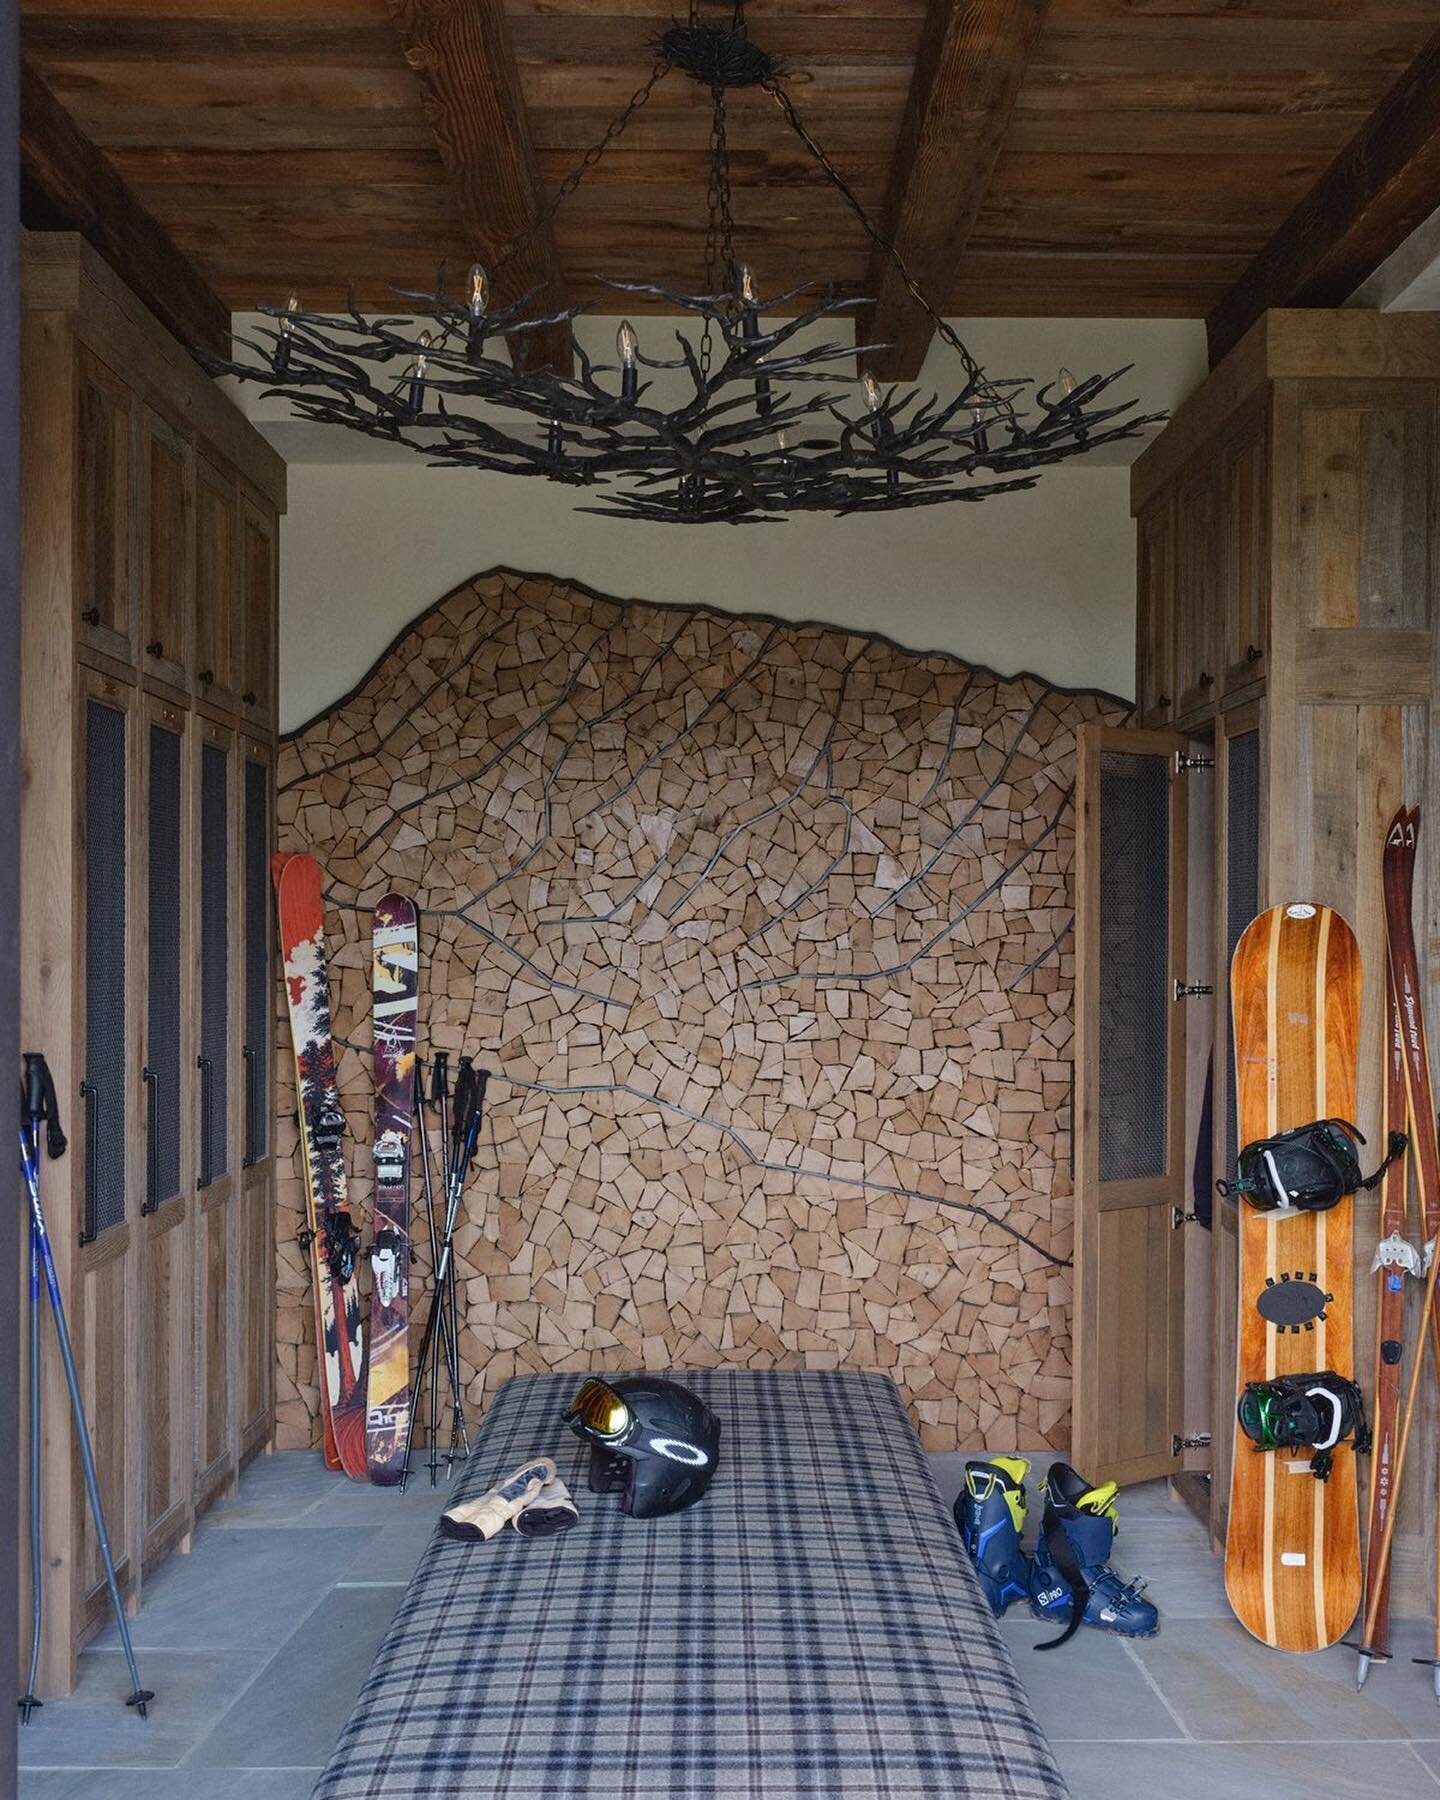 While the temps are still warm here in Montana, ski season is just around the corner..

Head to our website to check out more photos of &ldquo;No Regrets&rdquo;

#highlinepartners #mountainlife #skiroom #mudroomdesign #mountainhome #mountainlifestyle